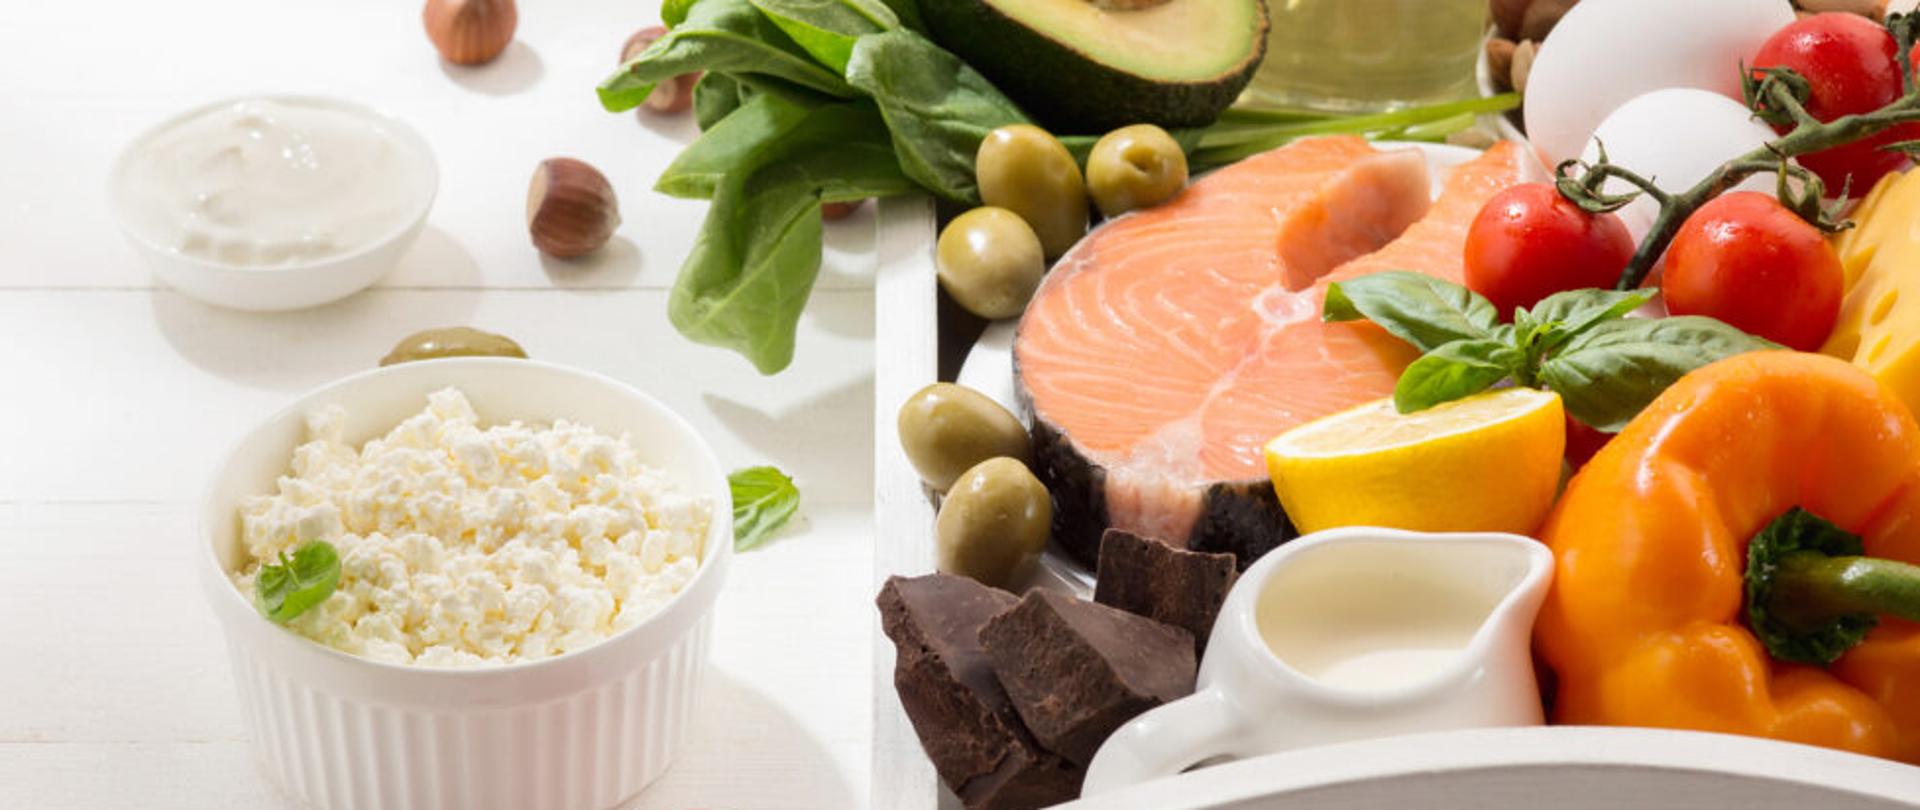 Ketogenic low carbs diet - food selection on white wooden background. Balanced healthy organic ingredients of high content of fats. Nutrition for the heart and blood vessels. Meat, fish and vegetables.